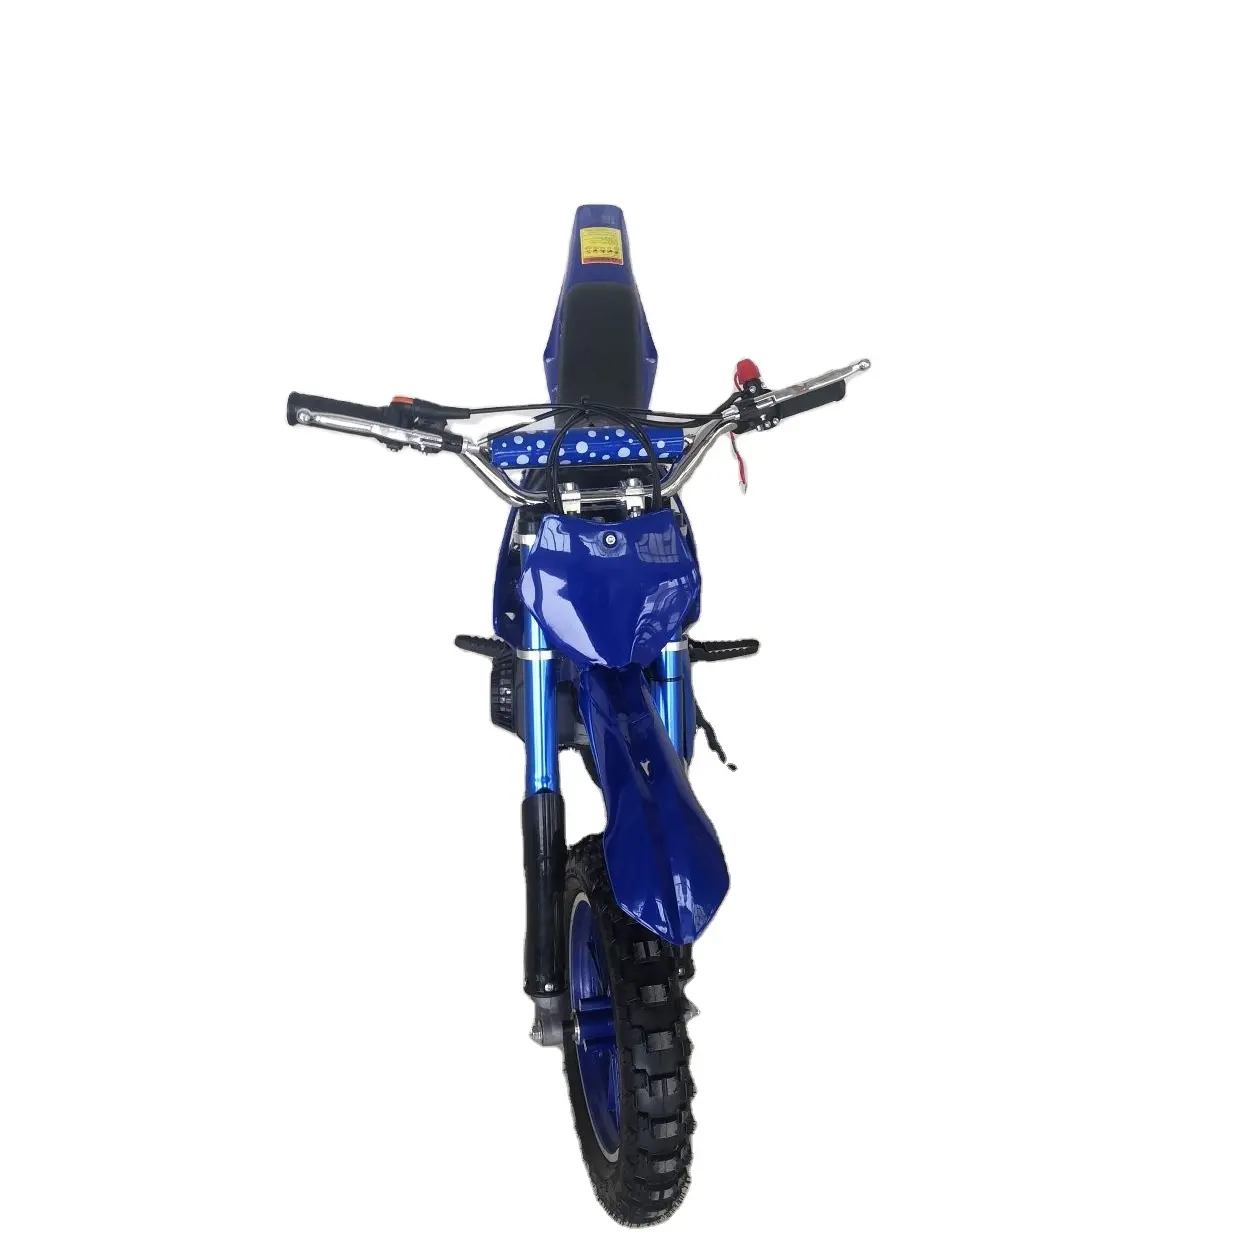 New fashion 2-stroke mini dirt bikes pull start gas mini motorcycle 49cc for kids with CE